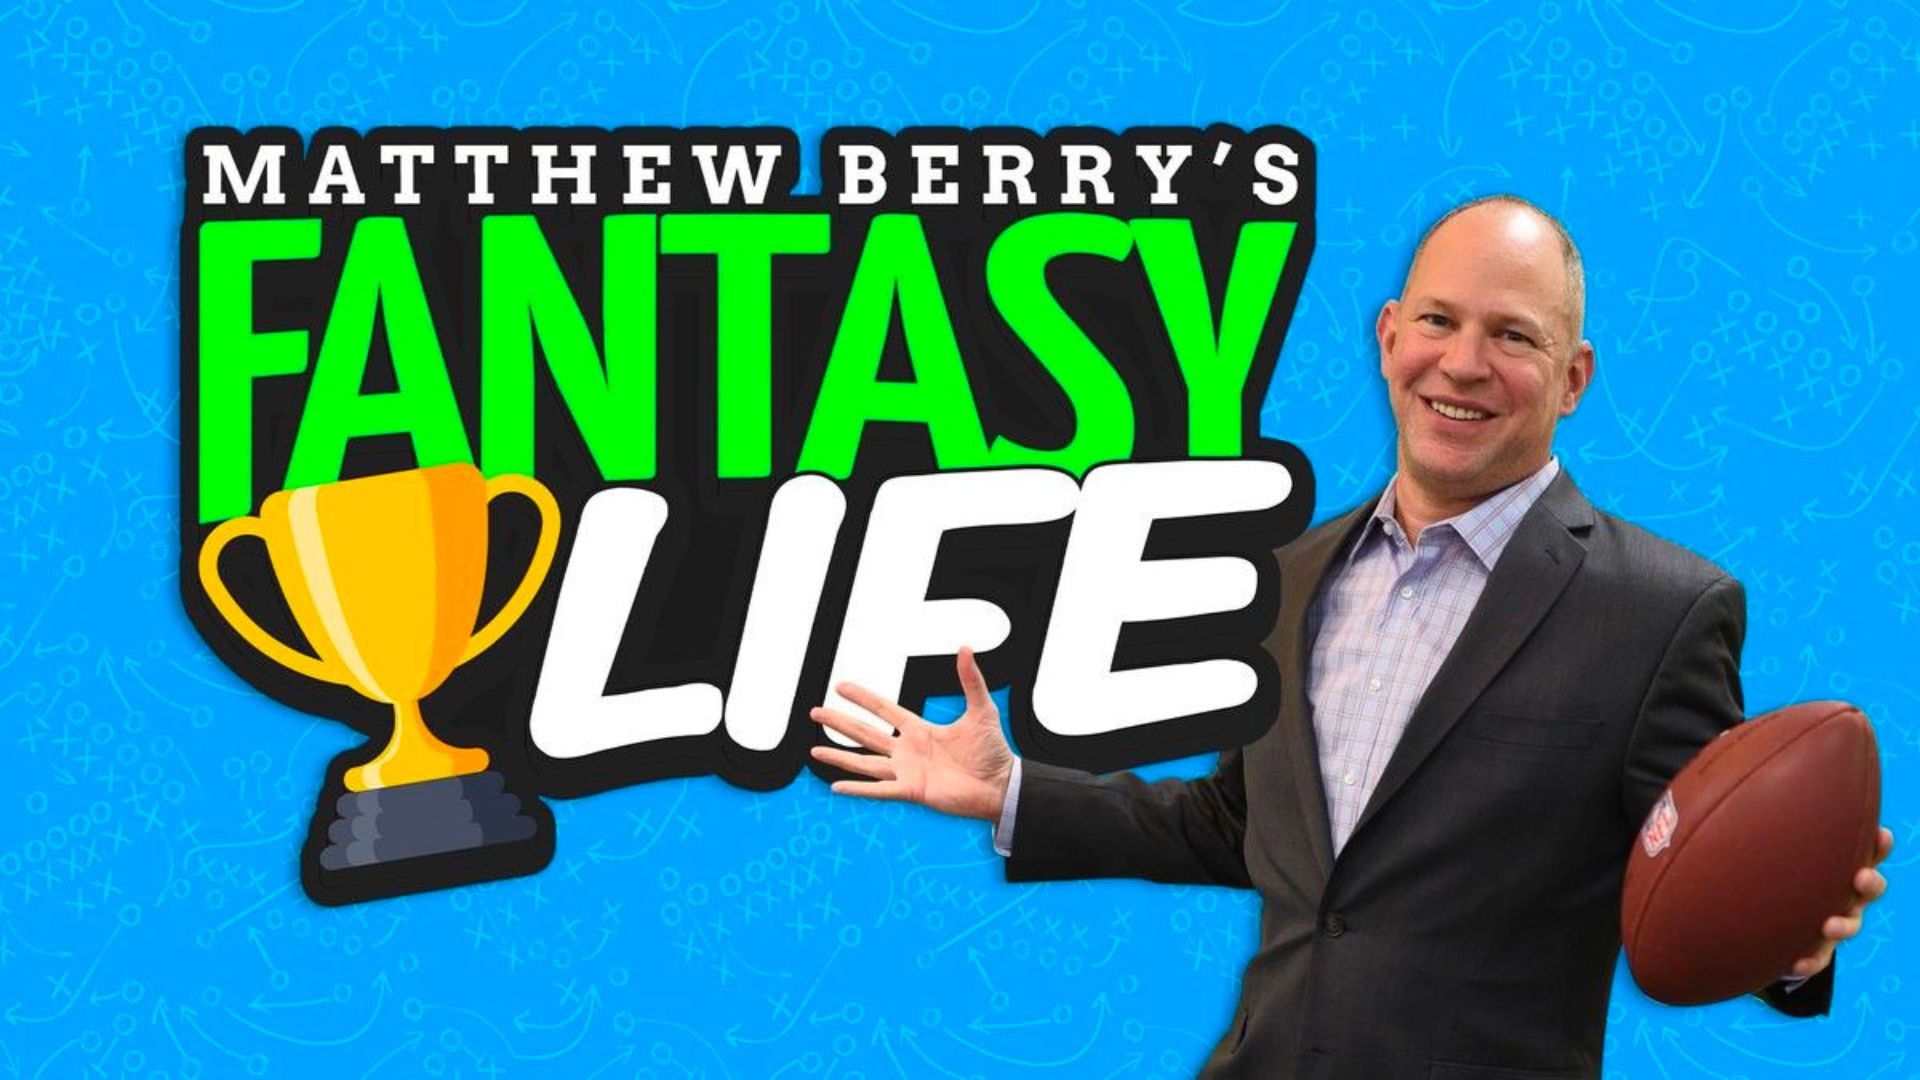 Fantasy Life Raises $2M from Athletes to Support Matthew Berry